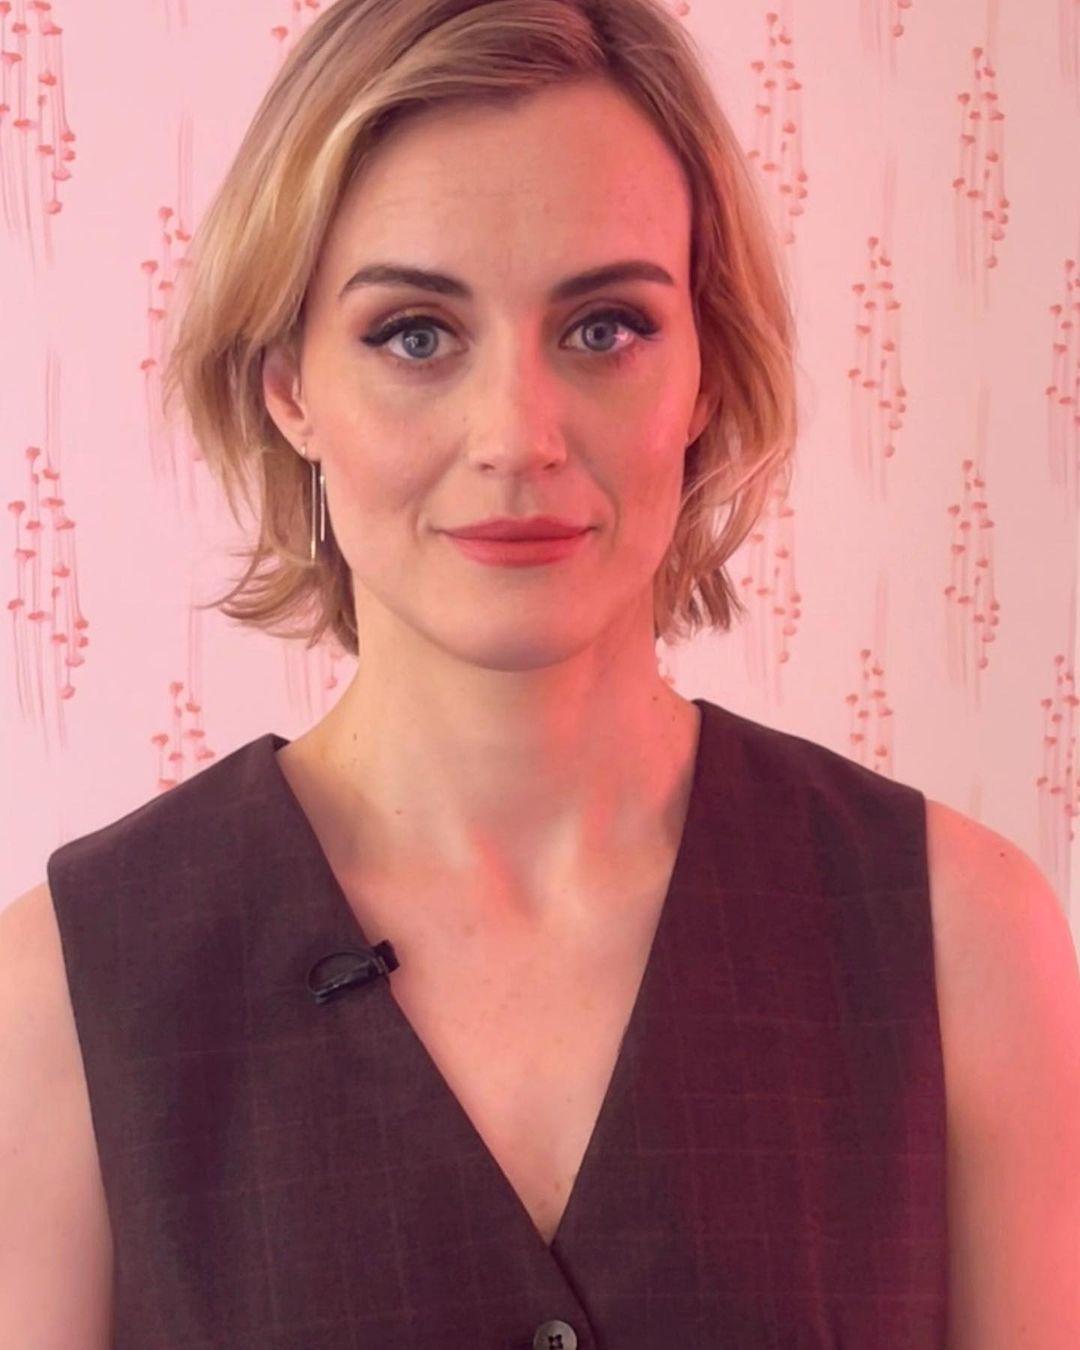 class="content__text"
 Reunited with this gorgeous soul #TaylorSchilling for the @thedrewbarrymoreshow talking all things @dearedwardtv 🌟

 #makeup by me
 #hair by @_marcosantini1 
 #styling by @kevinmichaelericson 

 #dearedward #makeupbygita #drewbarrymoreshow #orangeisthenewblack @thewallgroup ⚡️ 
 